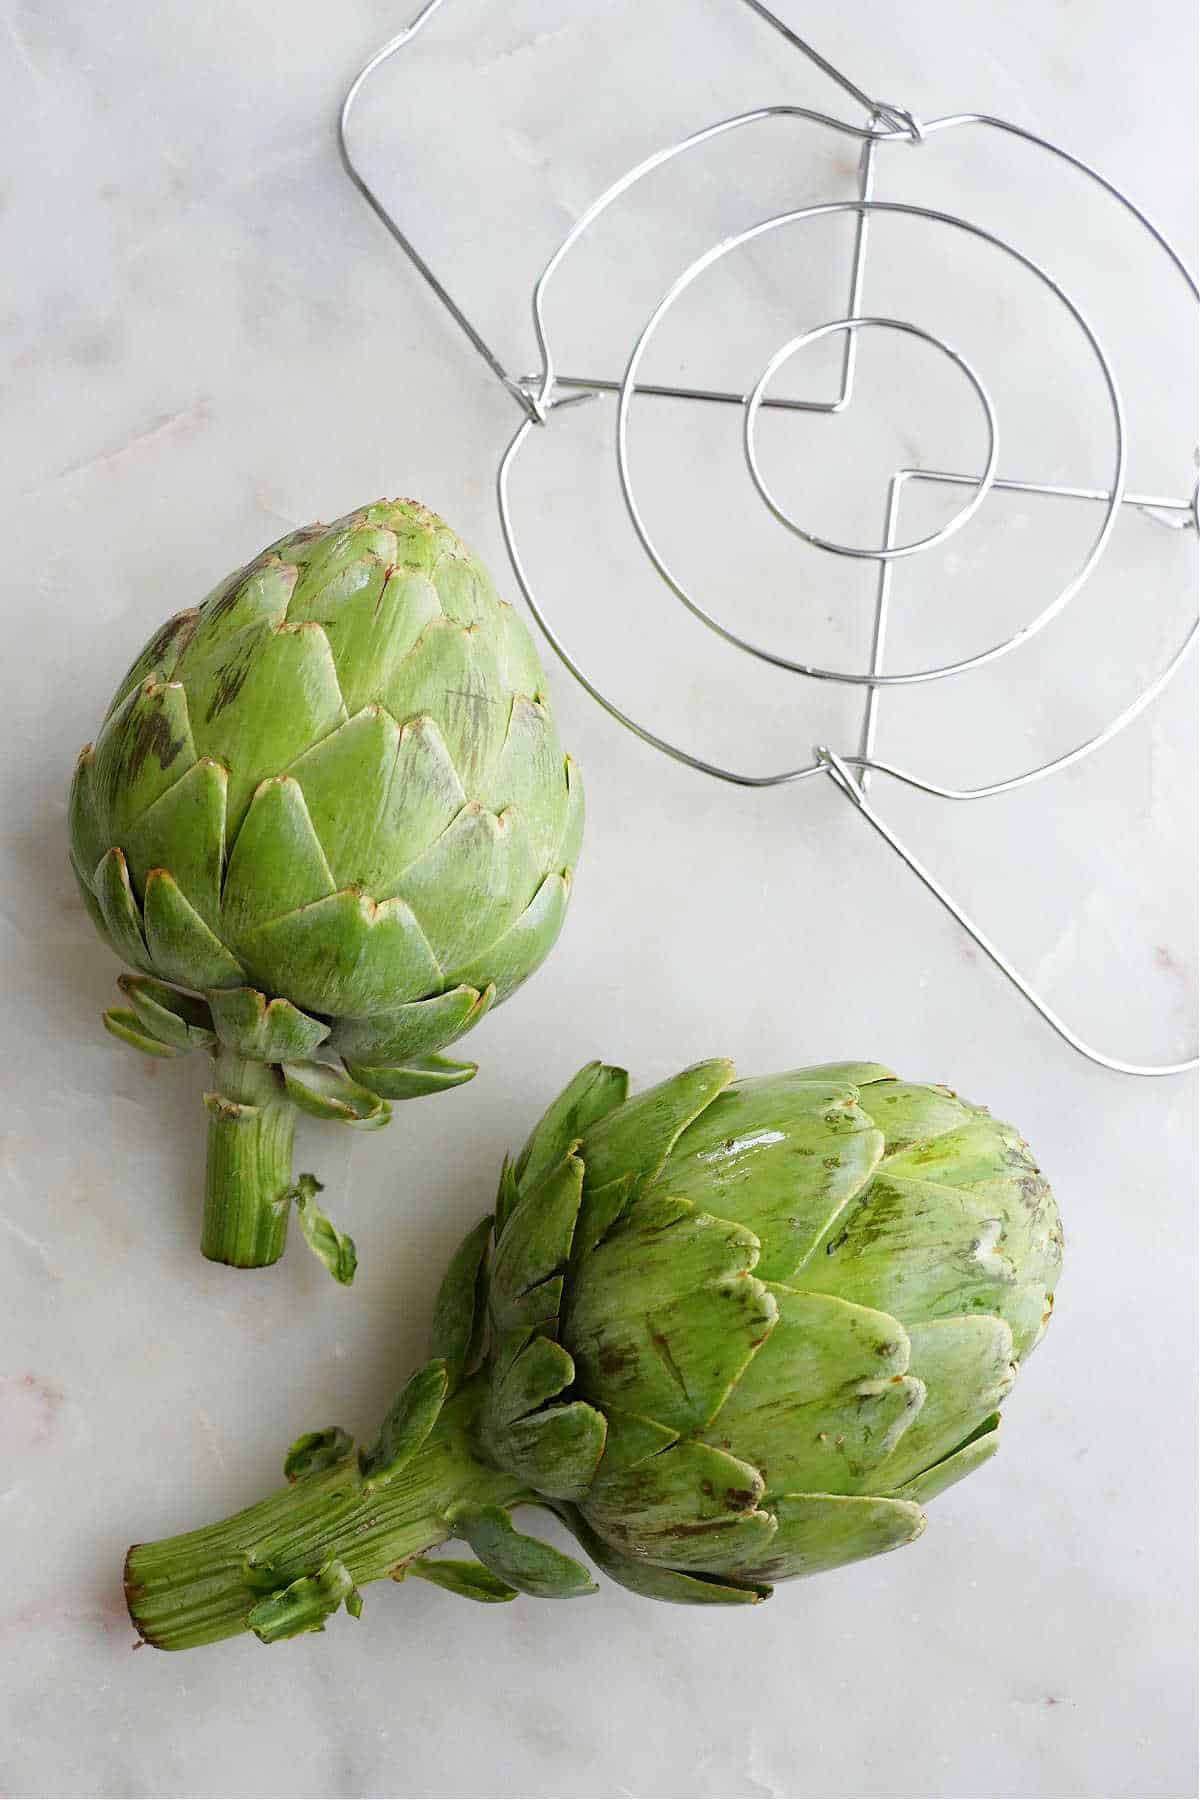 two artichokes next to an instant pot trivet on a counter